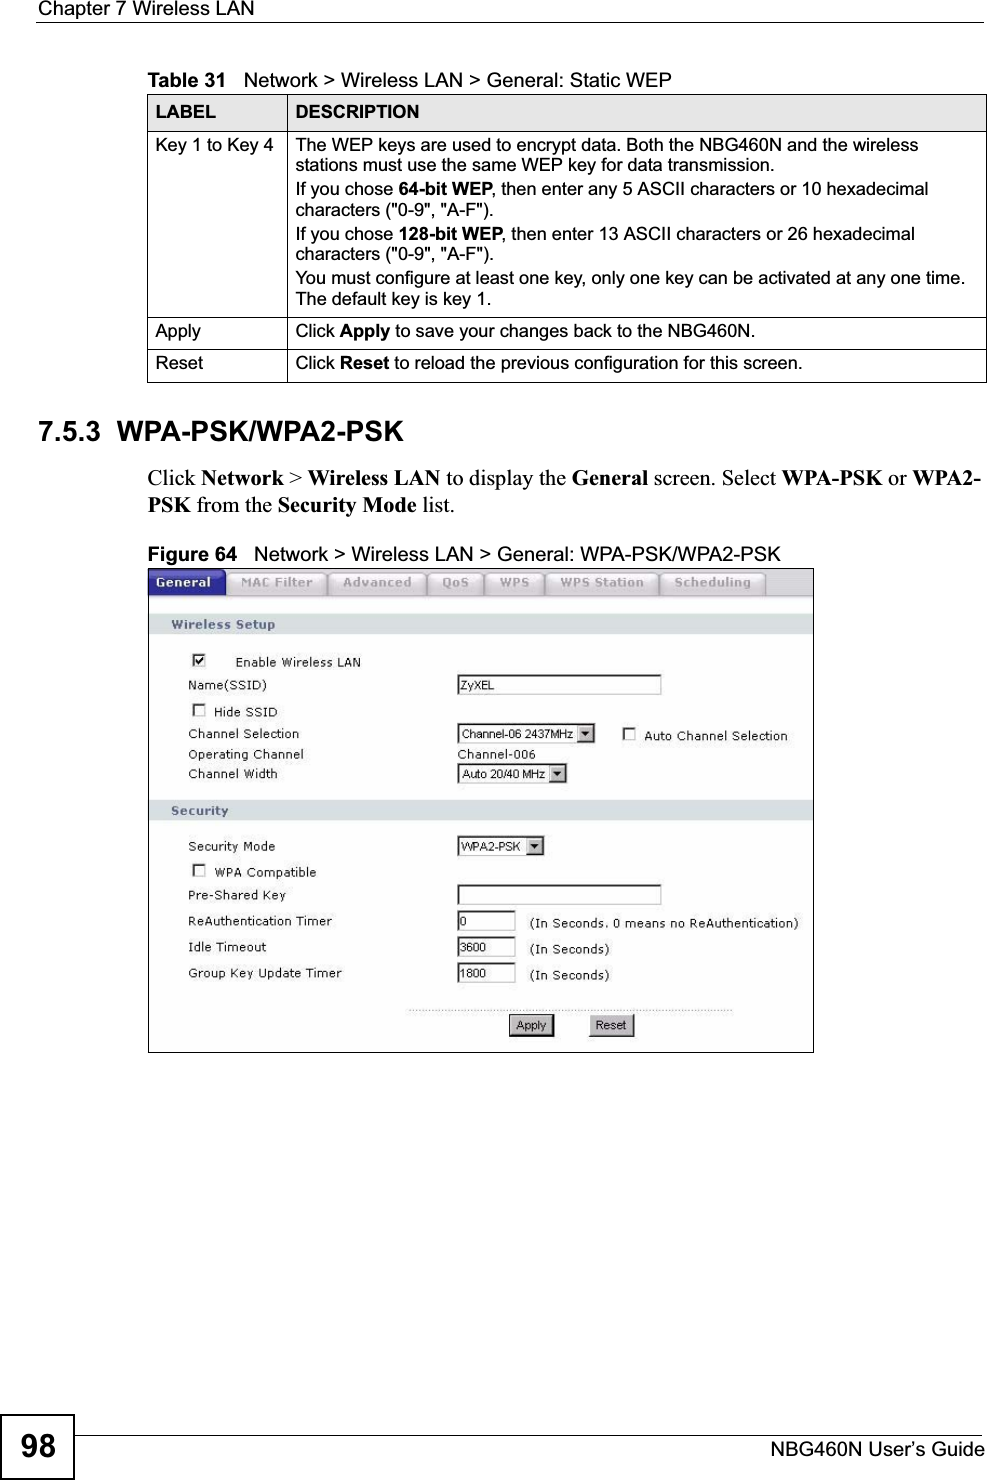 Chapter 7 Wireless LANNBG460N User’s Guide987.5.3  WPA-PSK/WPA2-PSKClick Network &gt; Wireless LAN to display the General screen. Select WPA-PSK or WPA2-PSK from the Security Mode list.Figure 64   Network &gt; Wireless LAN &gt; General: WPA-PSK/WPA2-PSKKey 1 to Key 4 The WEP keys are used to encrypt data. Both the NBG460N and the wireless stations must use the same WEP key for data transmission.If you chose 64-bit WEP, then enter any 5 ASCII characters or 10 hexadecimal characters (&quot;0-9&quot;, &quot;A-F&quot;).If you chose 128-bit WEP, then enter 13 ASCII characters or 26 hexadecimal characters (&quot;0-9&quot;, &quot;A-F&quot;). You must configure at least one key, only one key can be activated at any one time. The default key is key 1.Apply Click Apply to save your changes back to the NBG460N.Reset Click Reset to reload the previous configuration for this screen.Table 31   Network &gt; Wireless LAN &gt; General: Static WEPLABEL DESCRIPTION